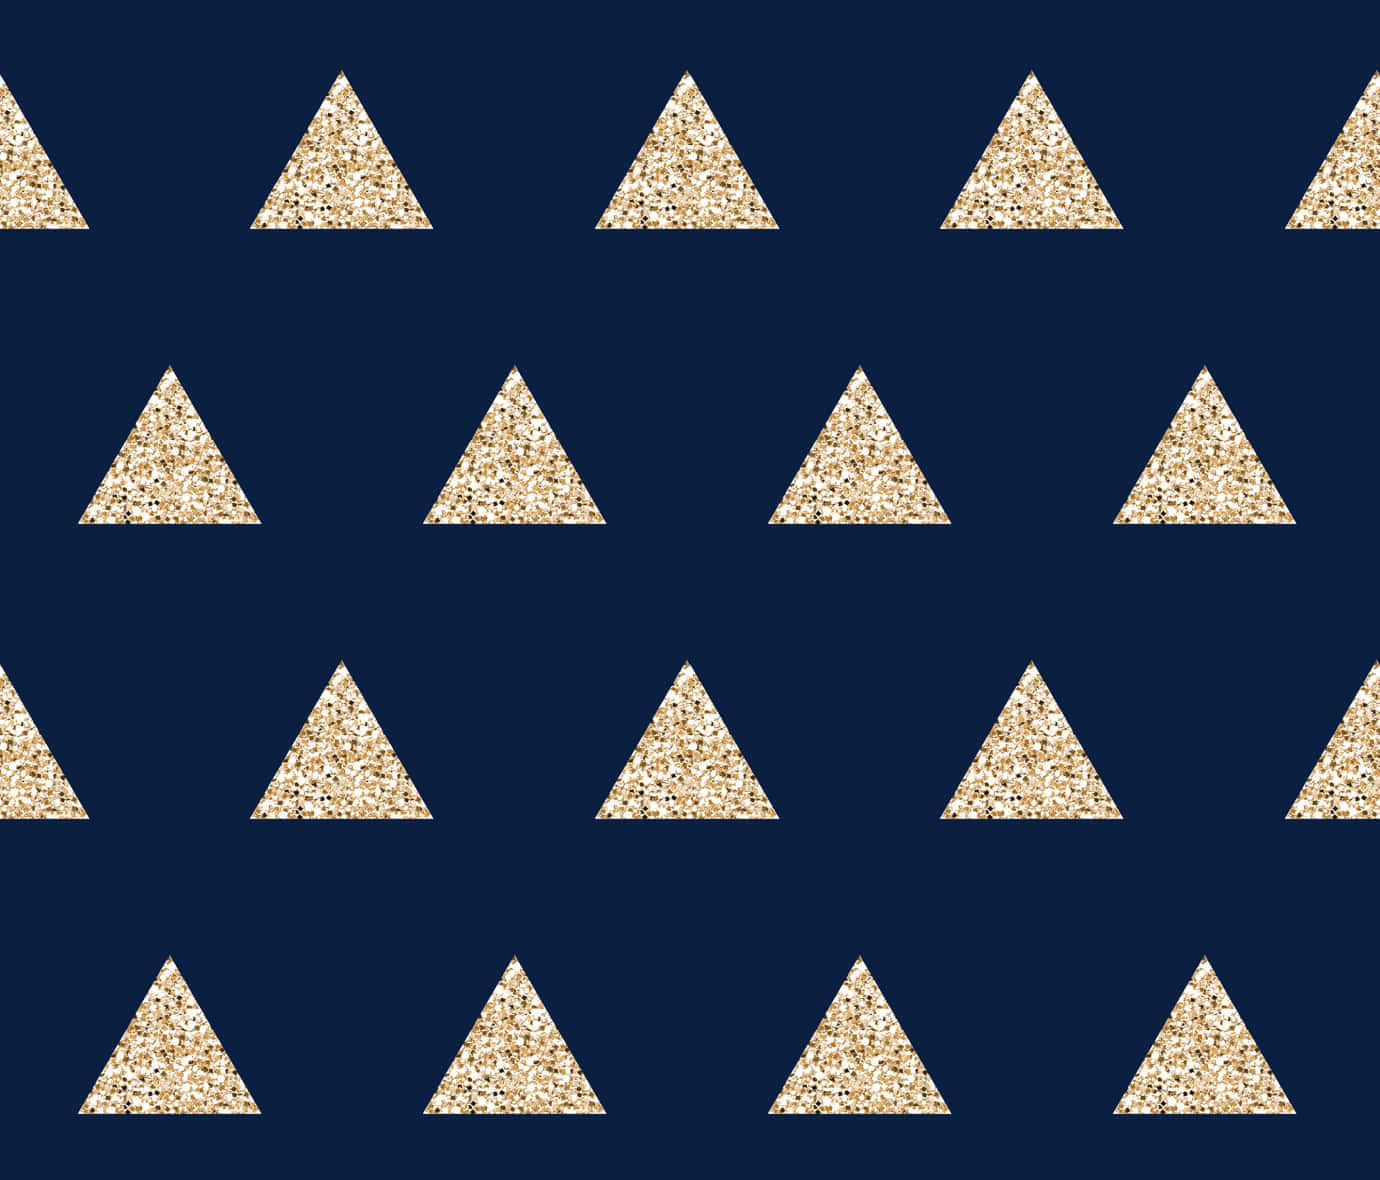 A regal looking royal blue and gold background